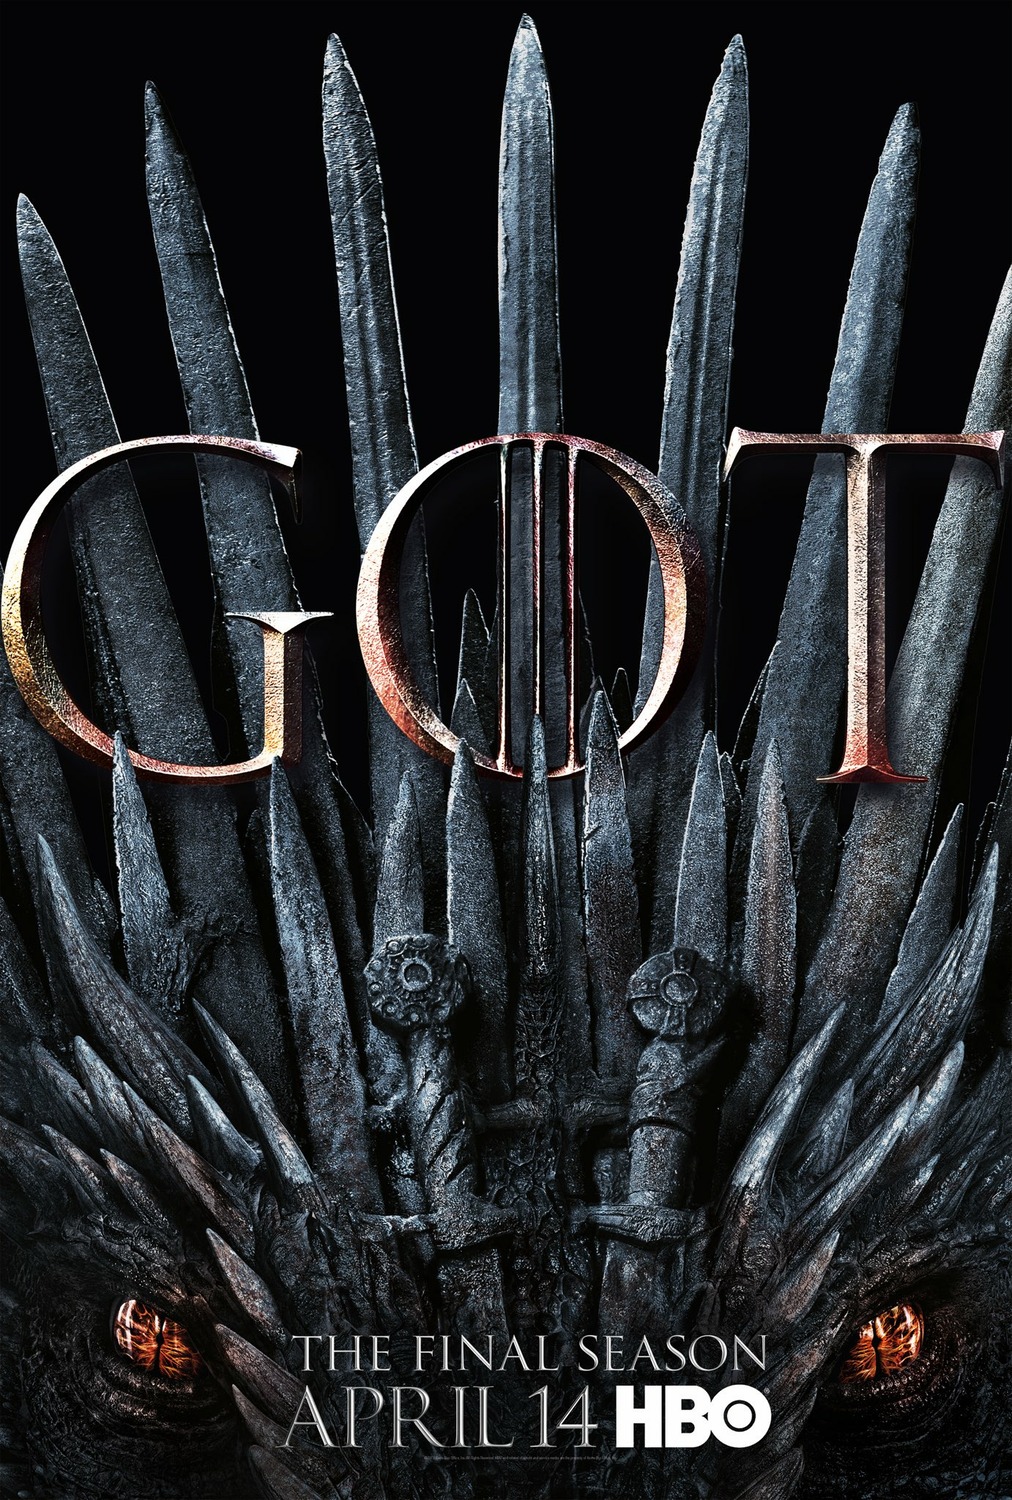 Extra Large Movie Poster Image for Game of Thrones (#124 of 125)